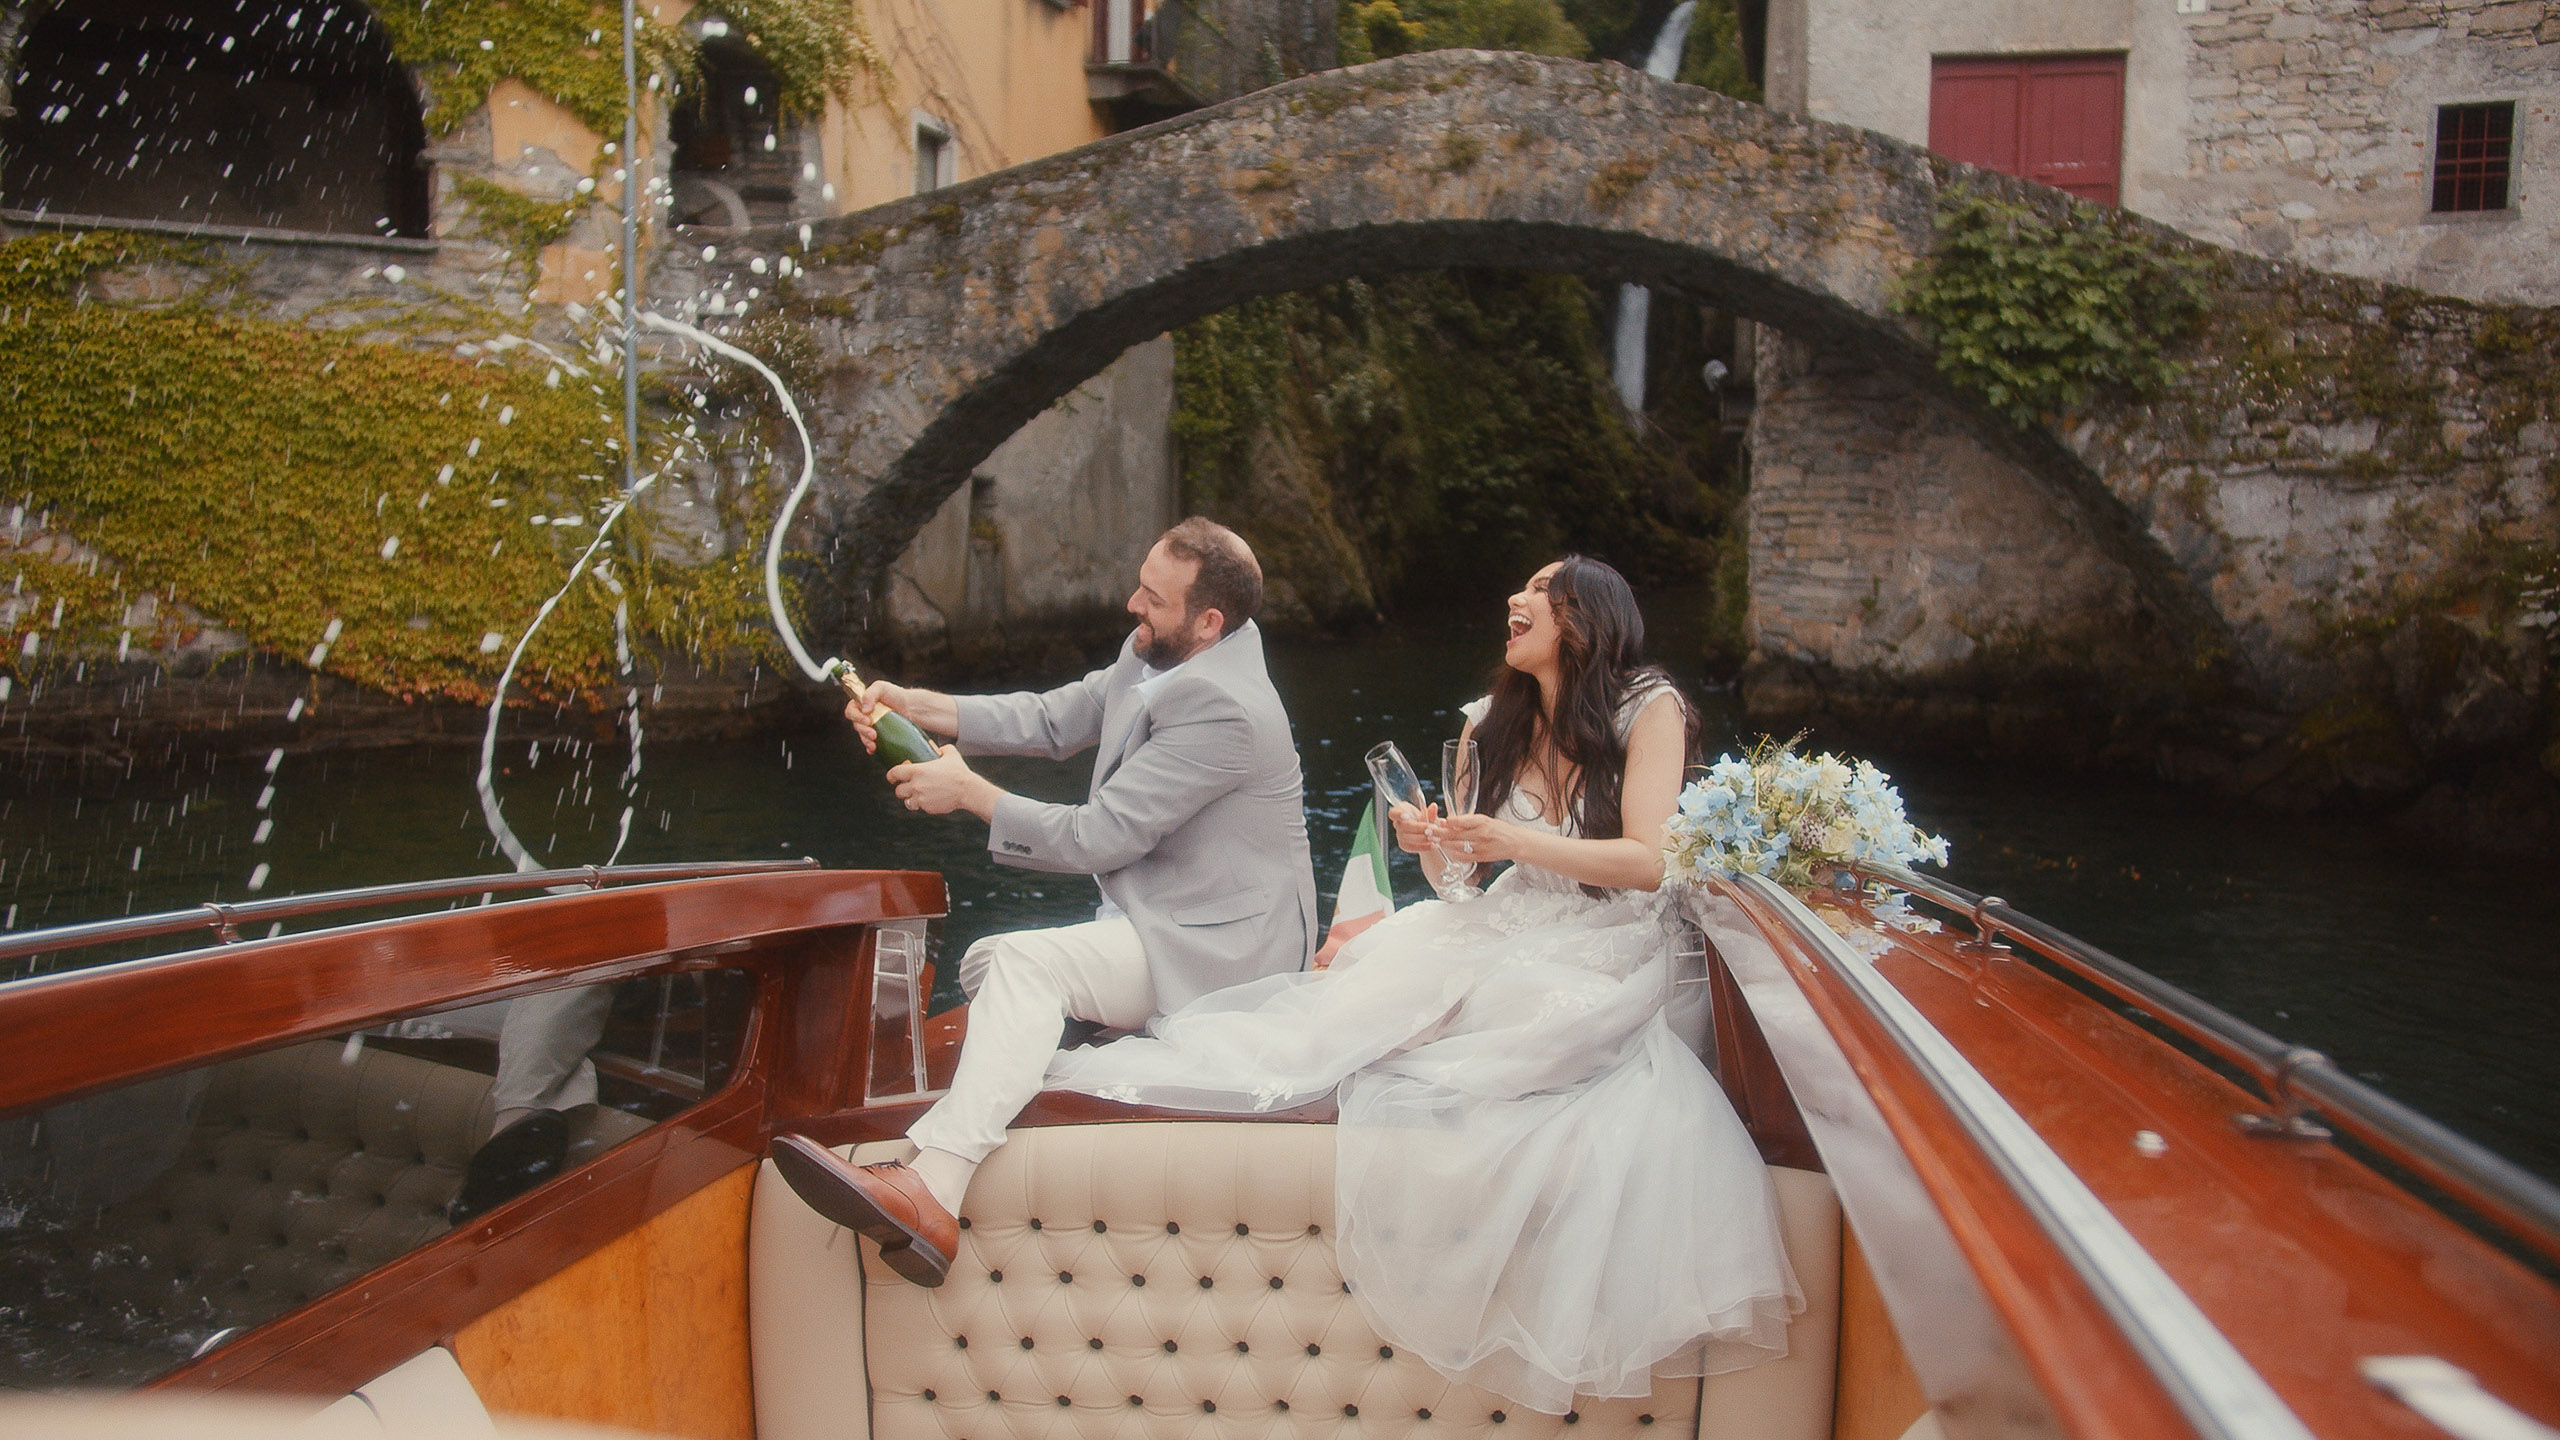 Lake Como Elopement - Bride and groom popping champagne from the boat at Lake Como in Italy